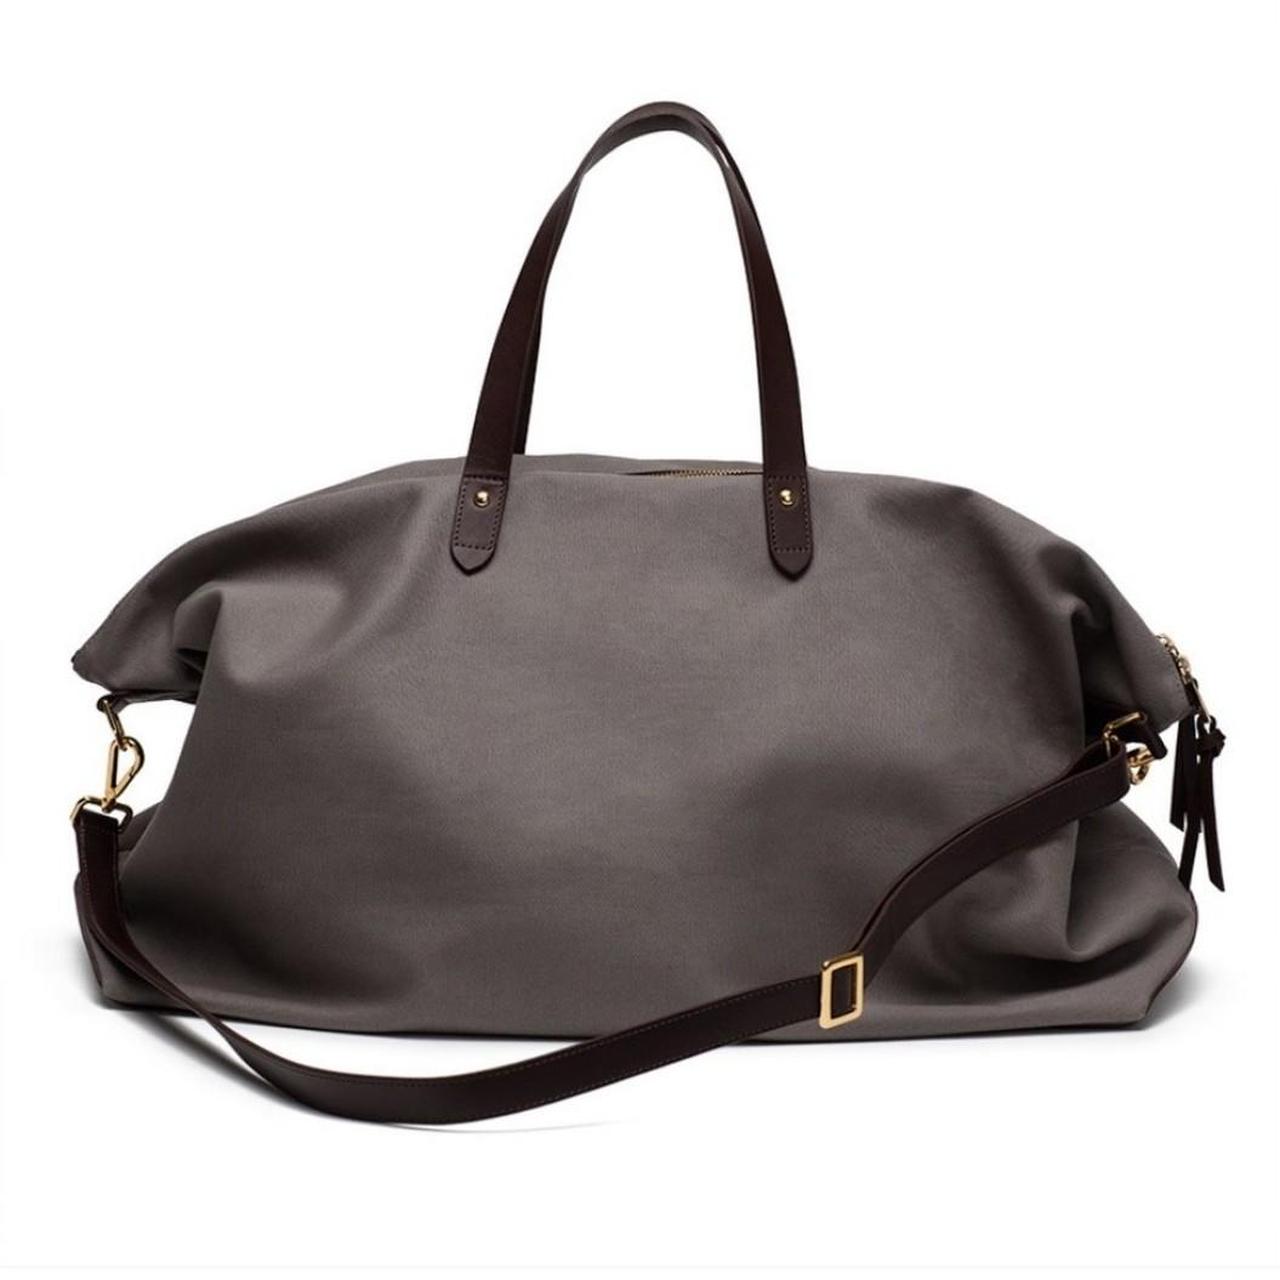 Product Image 1 - Cuyana Weekender Bag Charcoal Grey

Leather